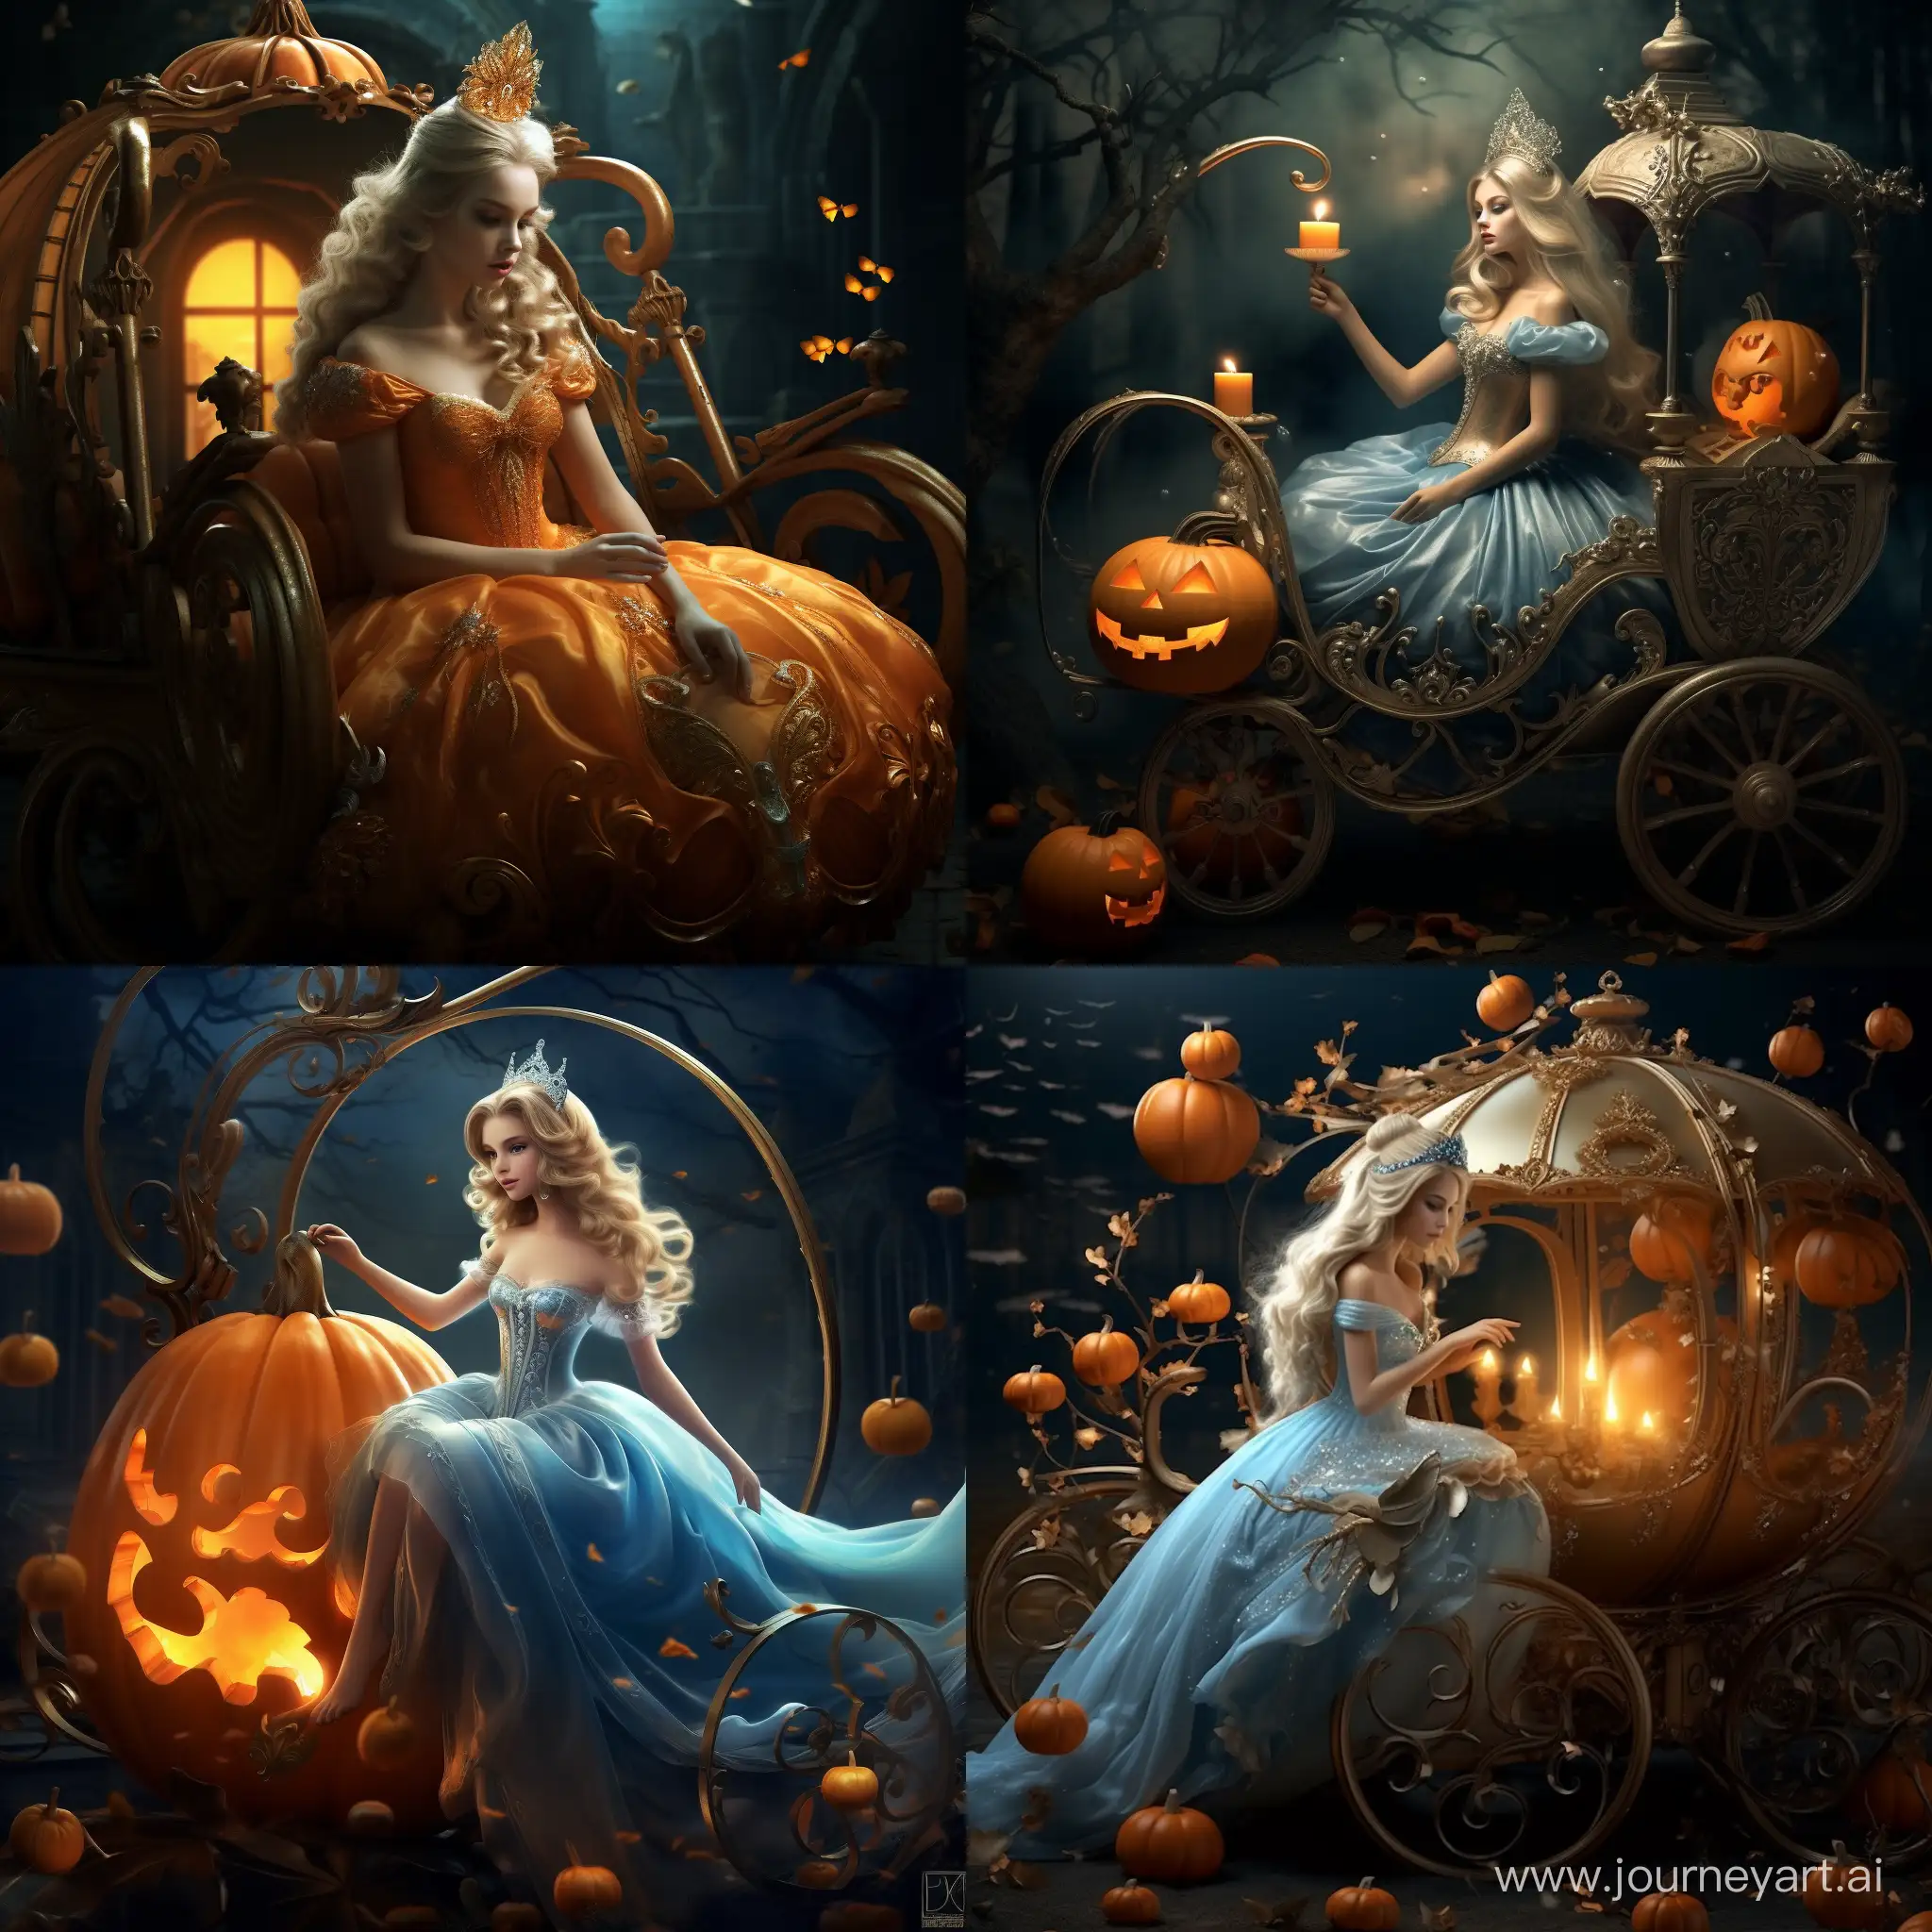 Enchanting-Cinderella-Arrives-at-the-Ball-in-a-Magical-Pumpkin-Carriage